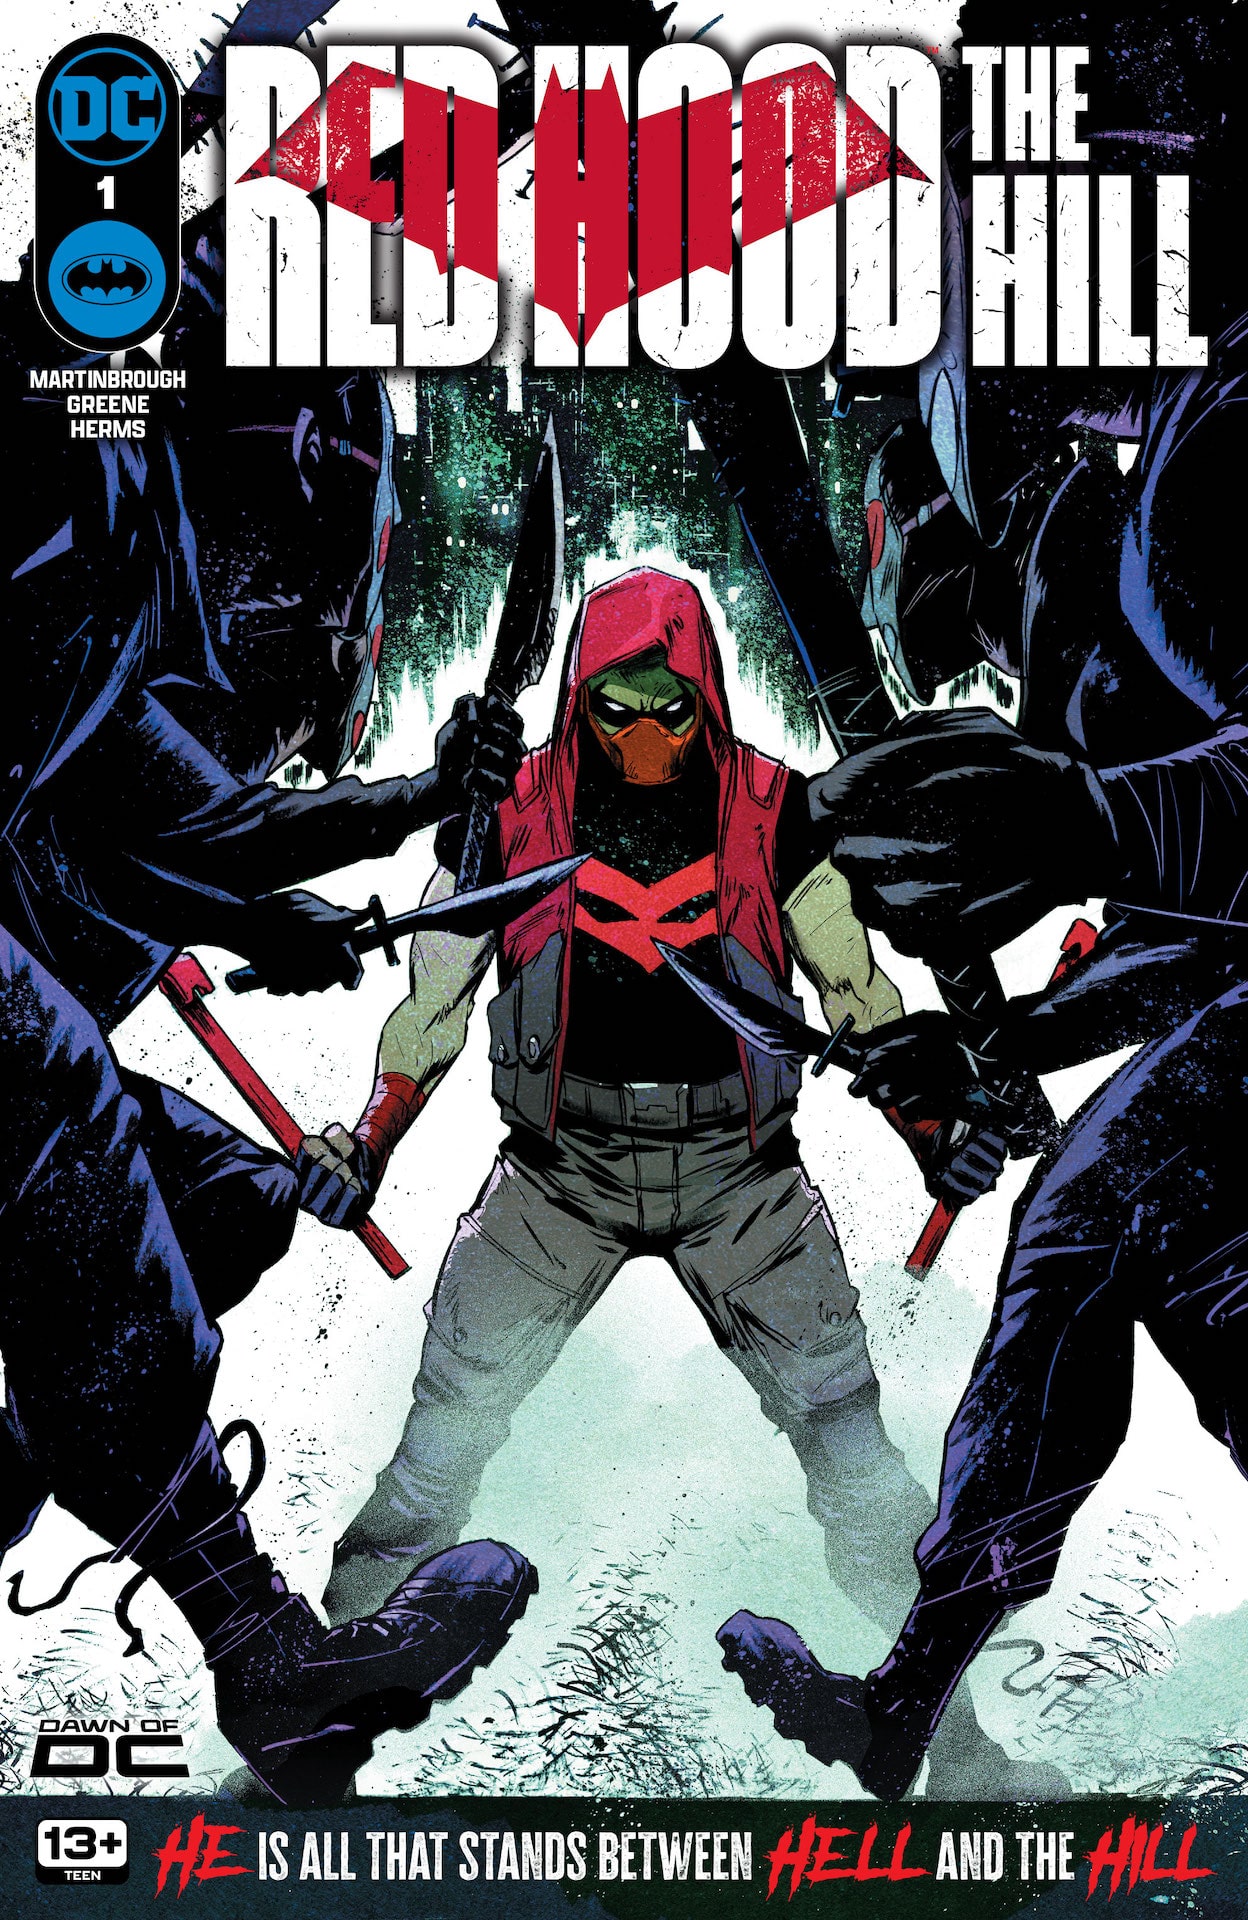 DC Preview: Red Hood: The Hill #1